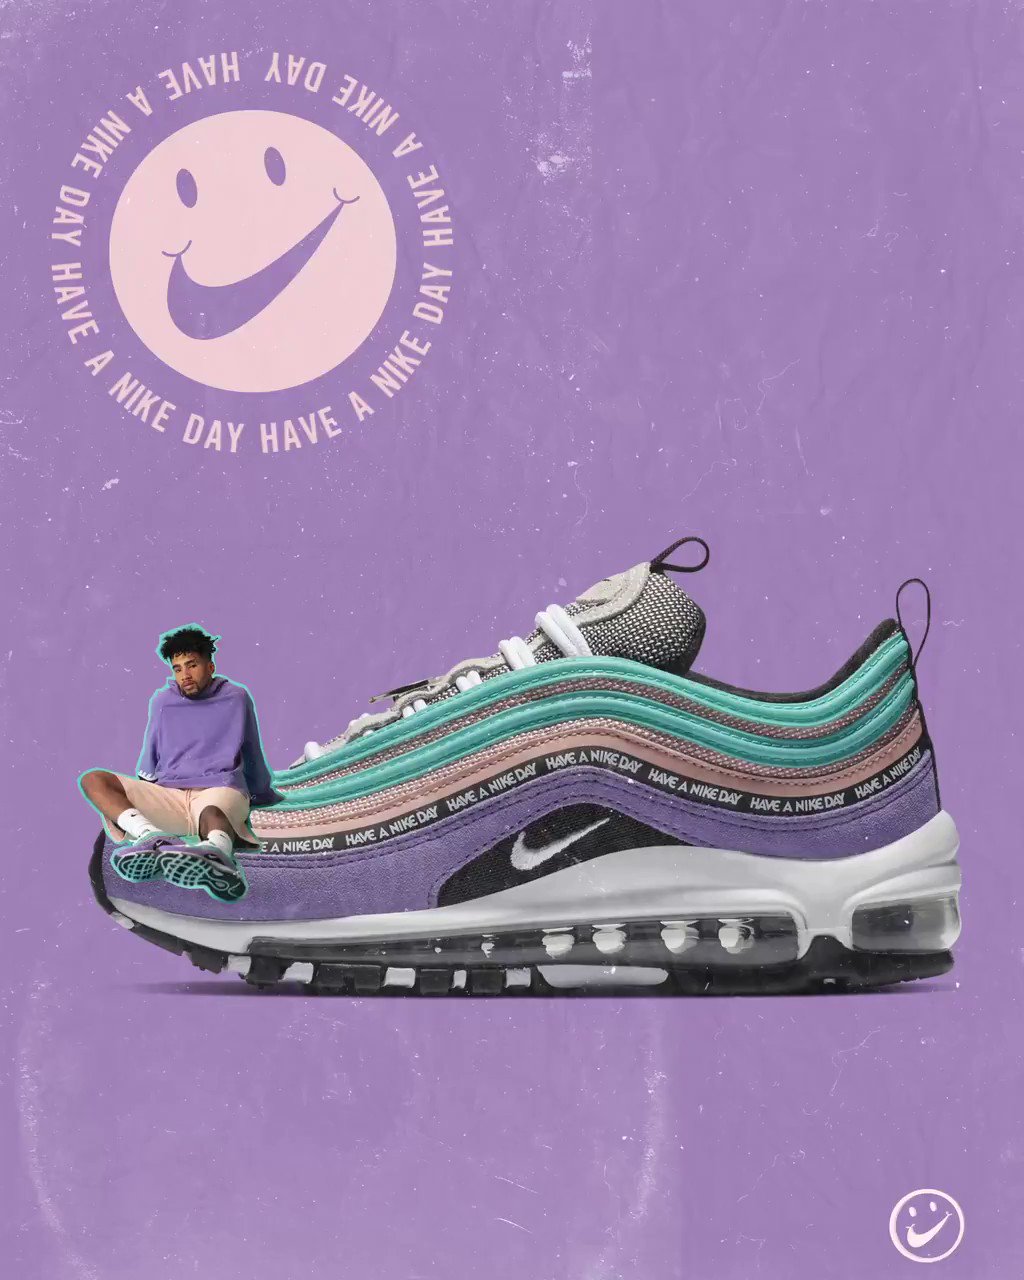 Sui Beoefend Persoonlijk Foot Locker on Twitter: "Big smiles. 🙂 #Nike Air Max 97 'Have A Nike Day'  Available Now, Select Stores! https://t.co/wFT3Ib4mvV" / X